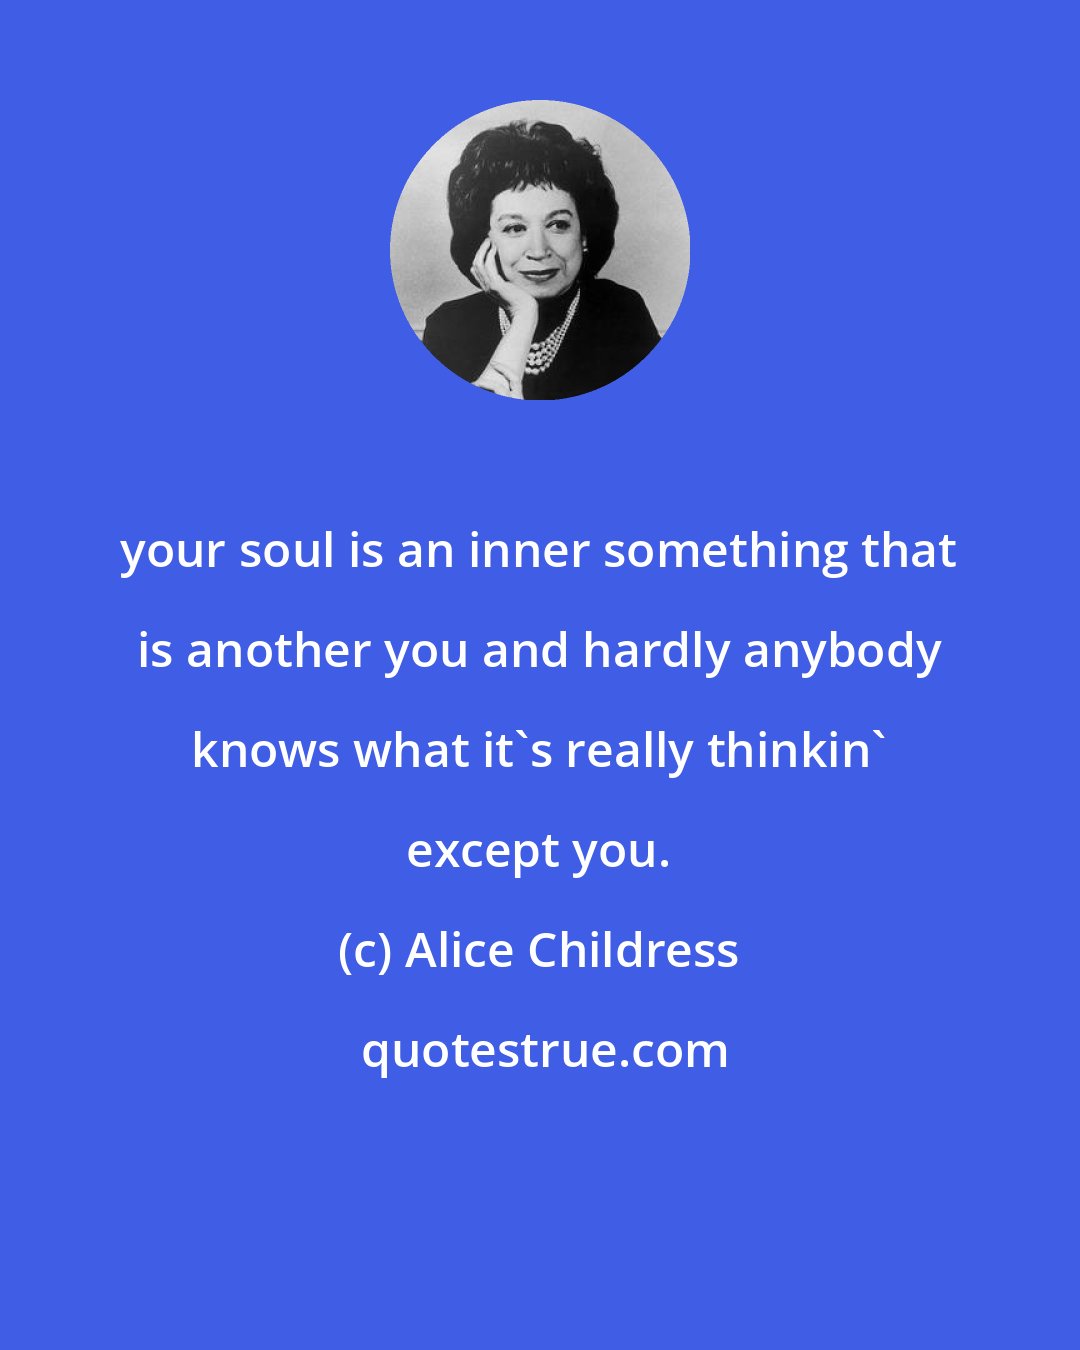 Alice Childress: your soul is an inner something that is another you and hardly anybody knows what it's really thinkin' except you.